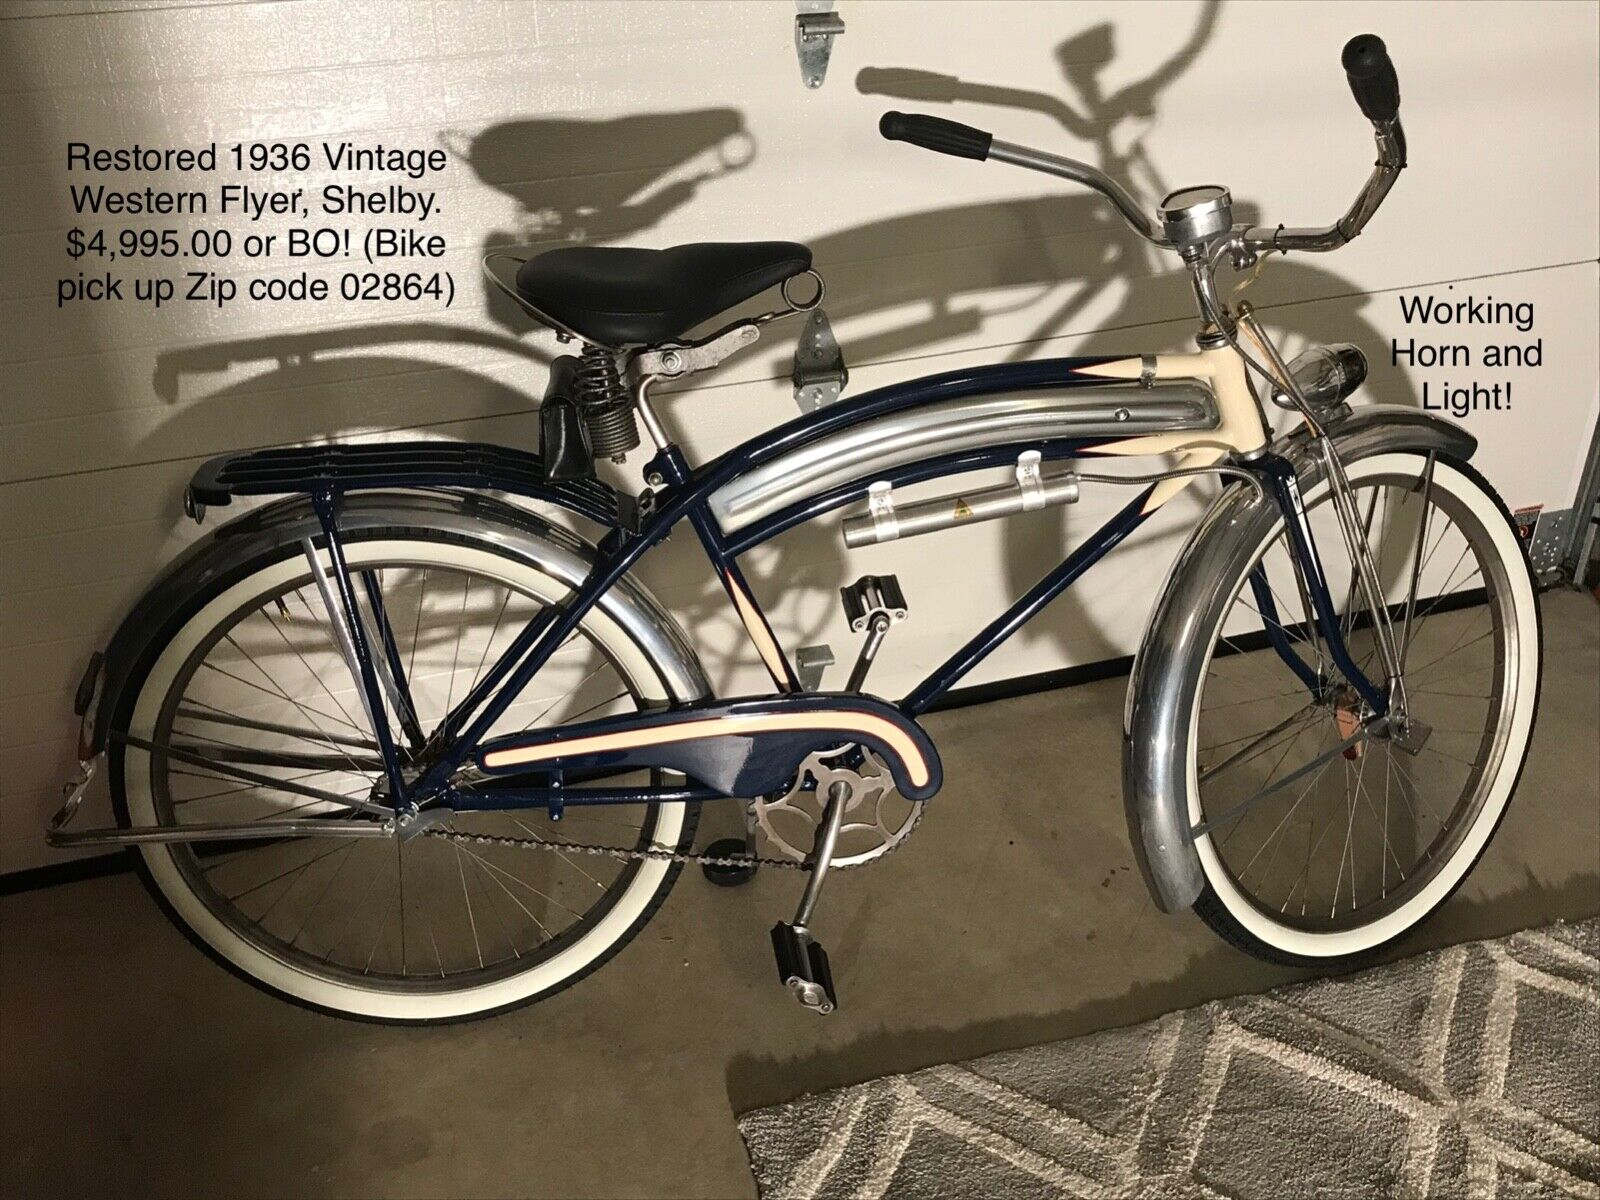 Vintage 1936 Western Flyer Shelby bicycle- Rare Model -Restored-REDUCED!! (4500 USD)